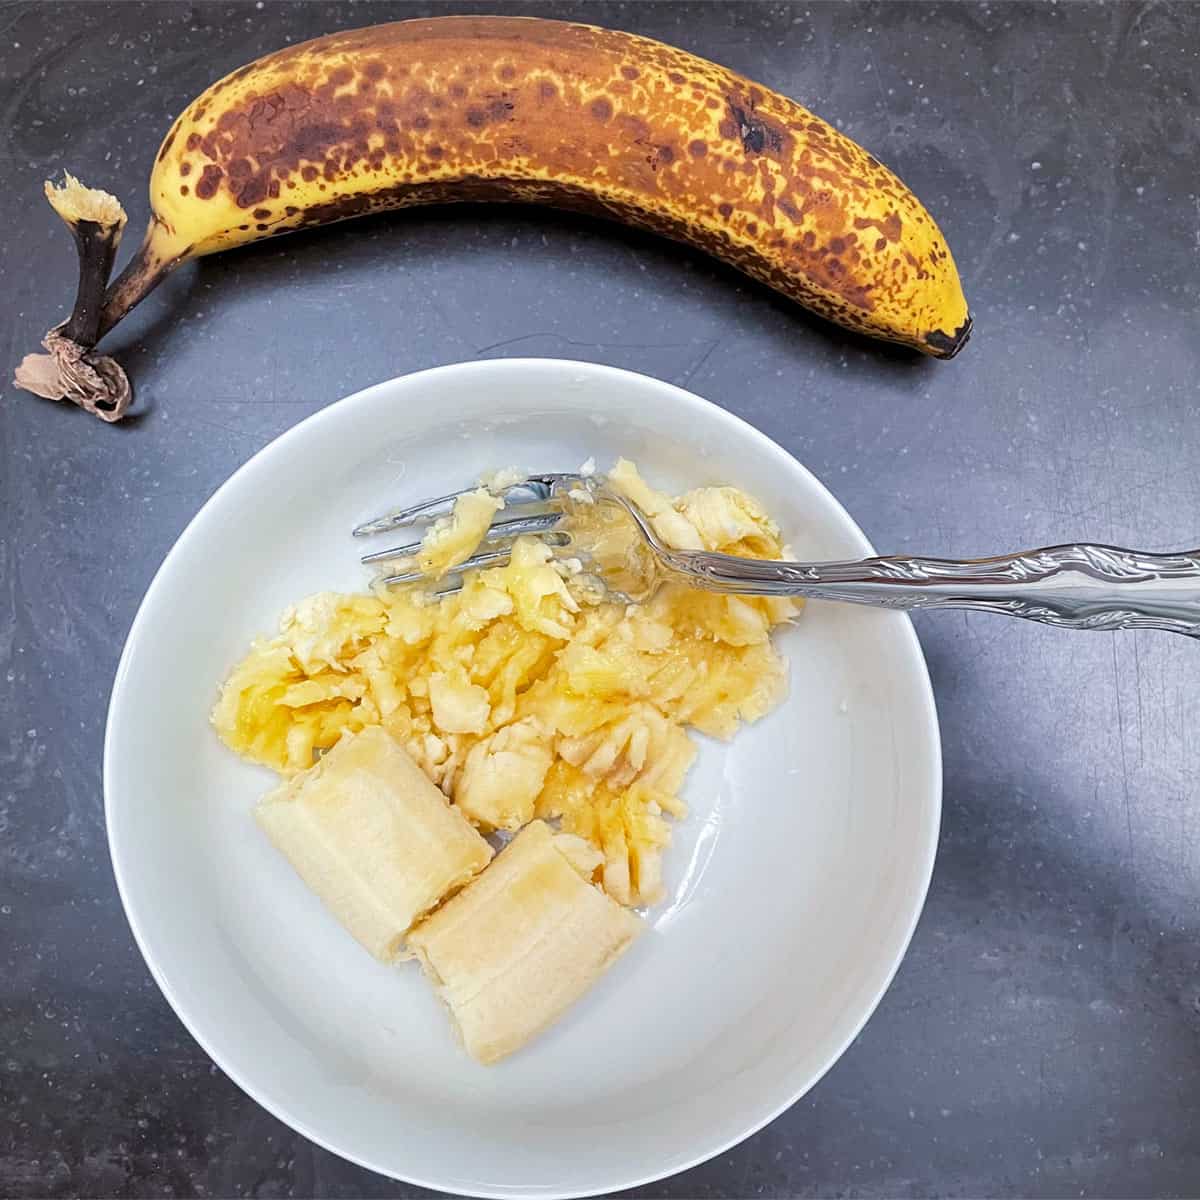 Smashing bananas with a fork in a bowl.